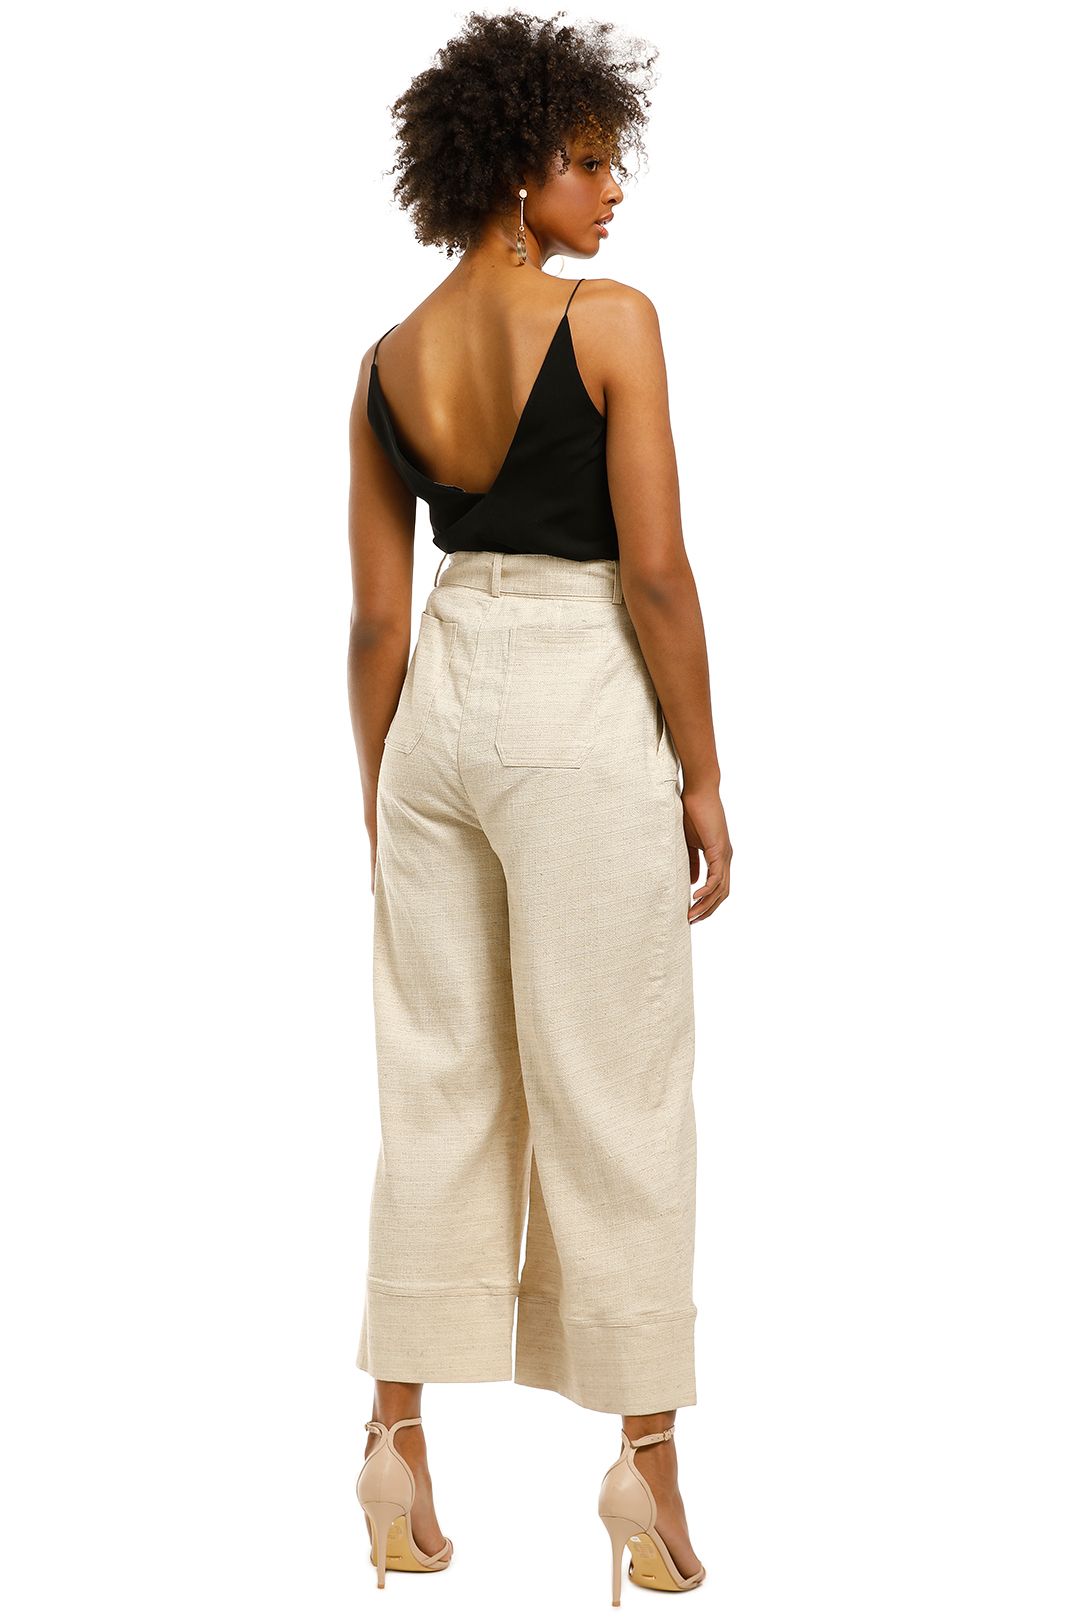 Ministry-of-Style-Freedom-Pant-Natural-Back